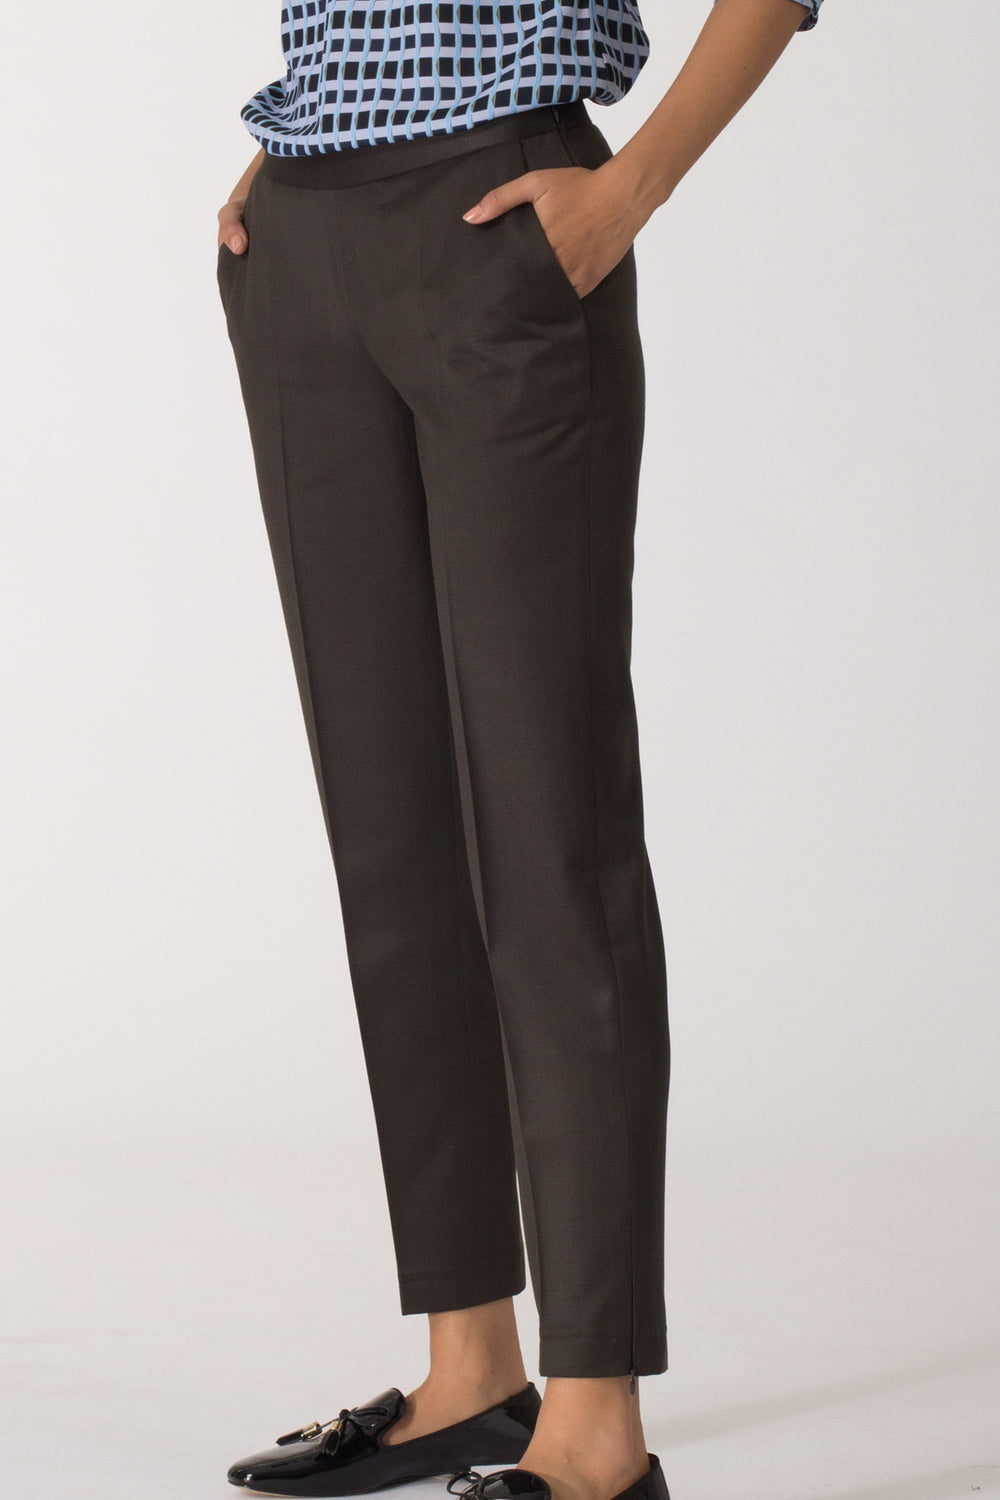 Well fitted, Smart, stylish women's formal pants and trousers for office. Shop online for all sizes including plus size formal trousers and pants at www.intermod.in